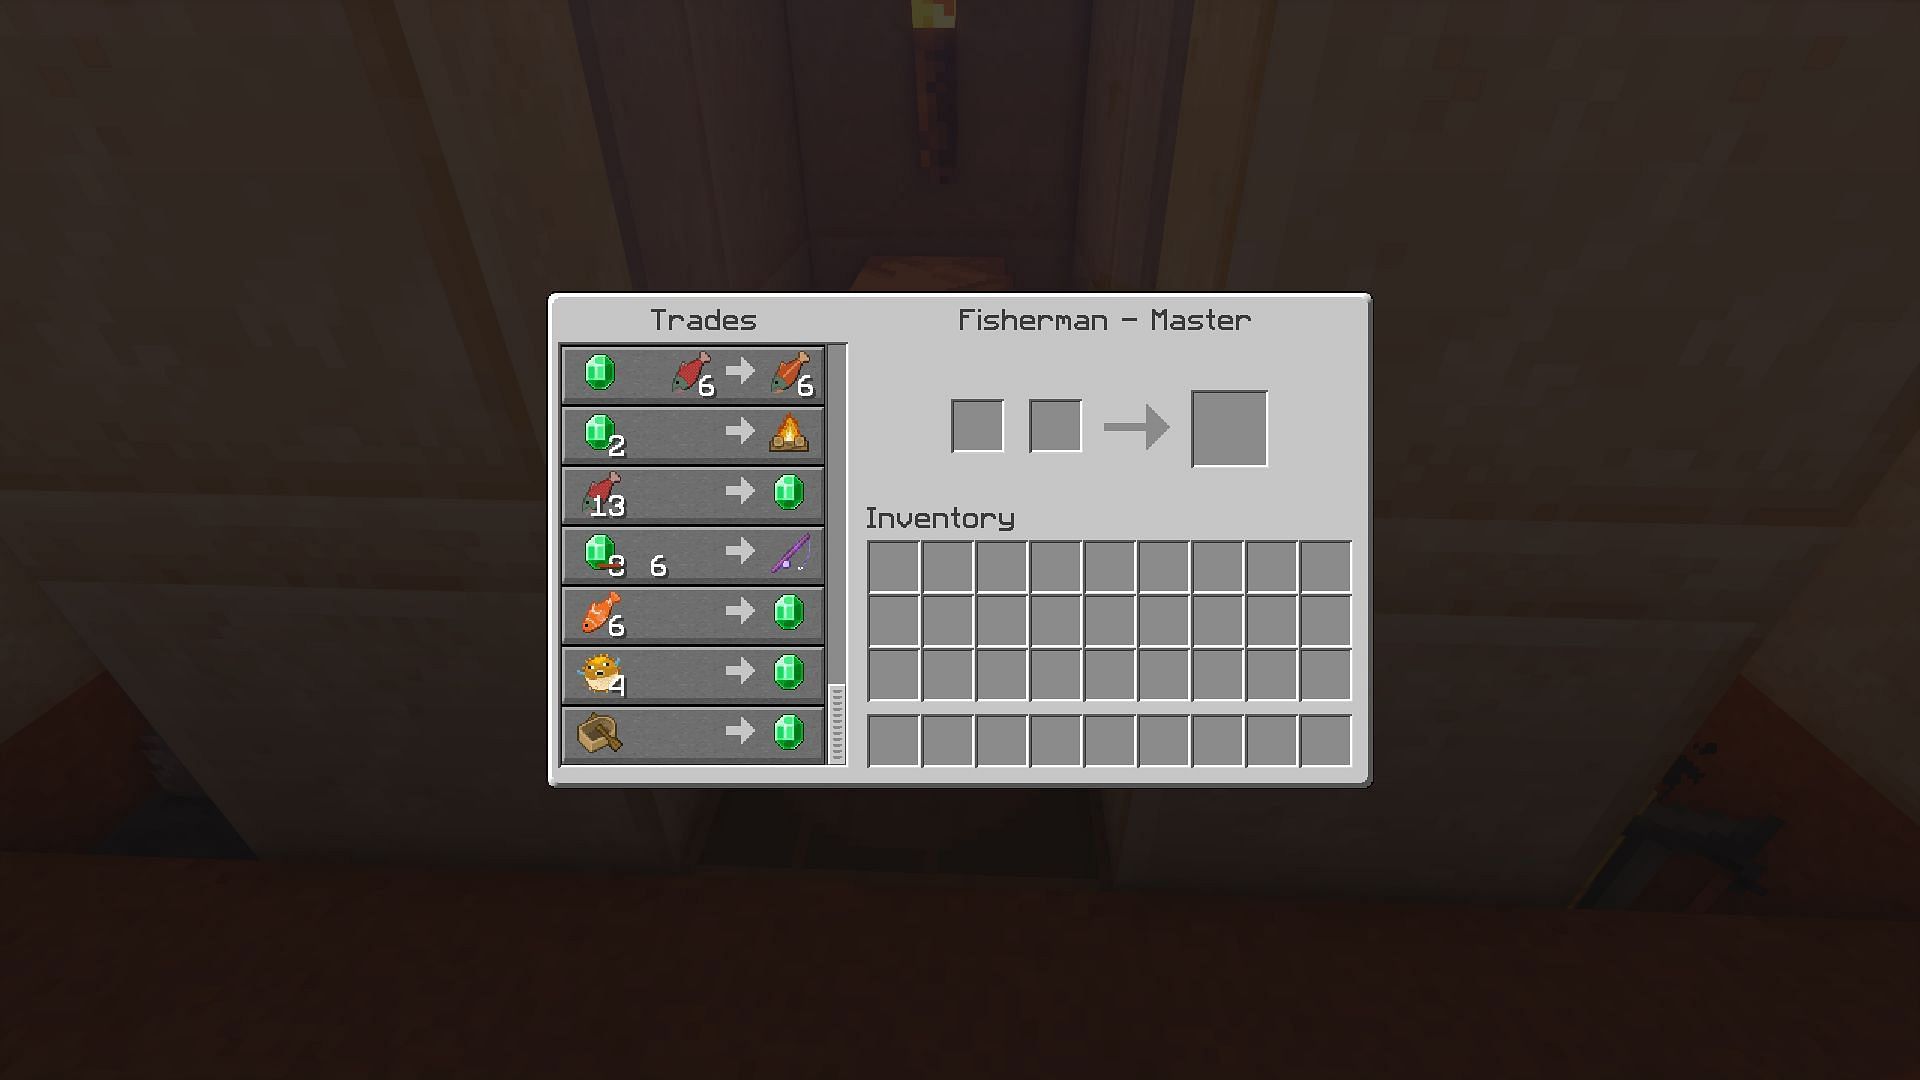 The trades offered by a fisherman (Image via Minecraft)